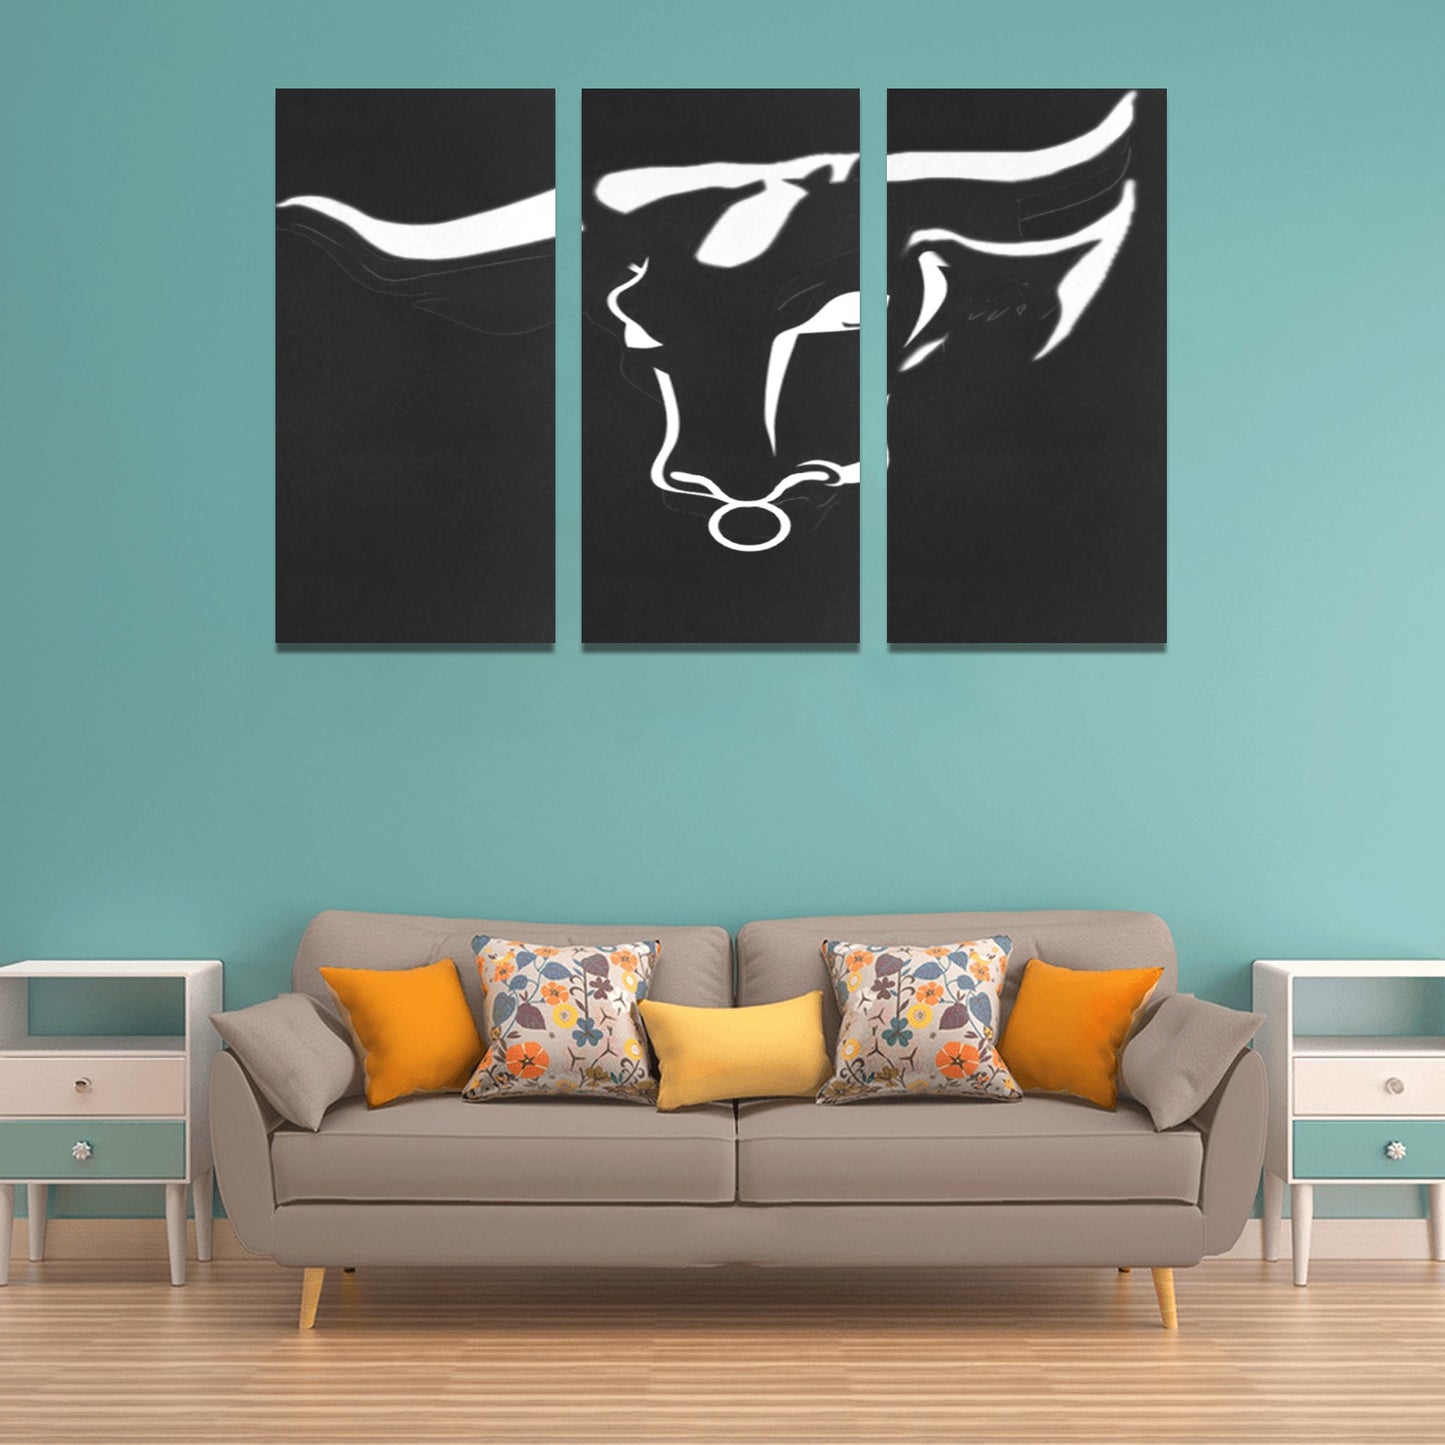 fz design collection too one size / fz the bull framed canvas art prints set x (3 pieces) (made in usa)